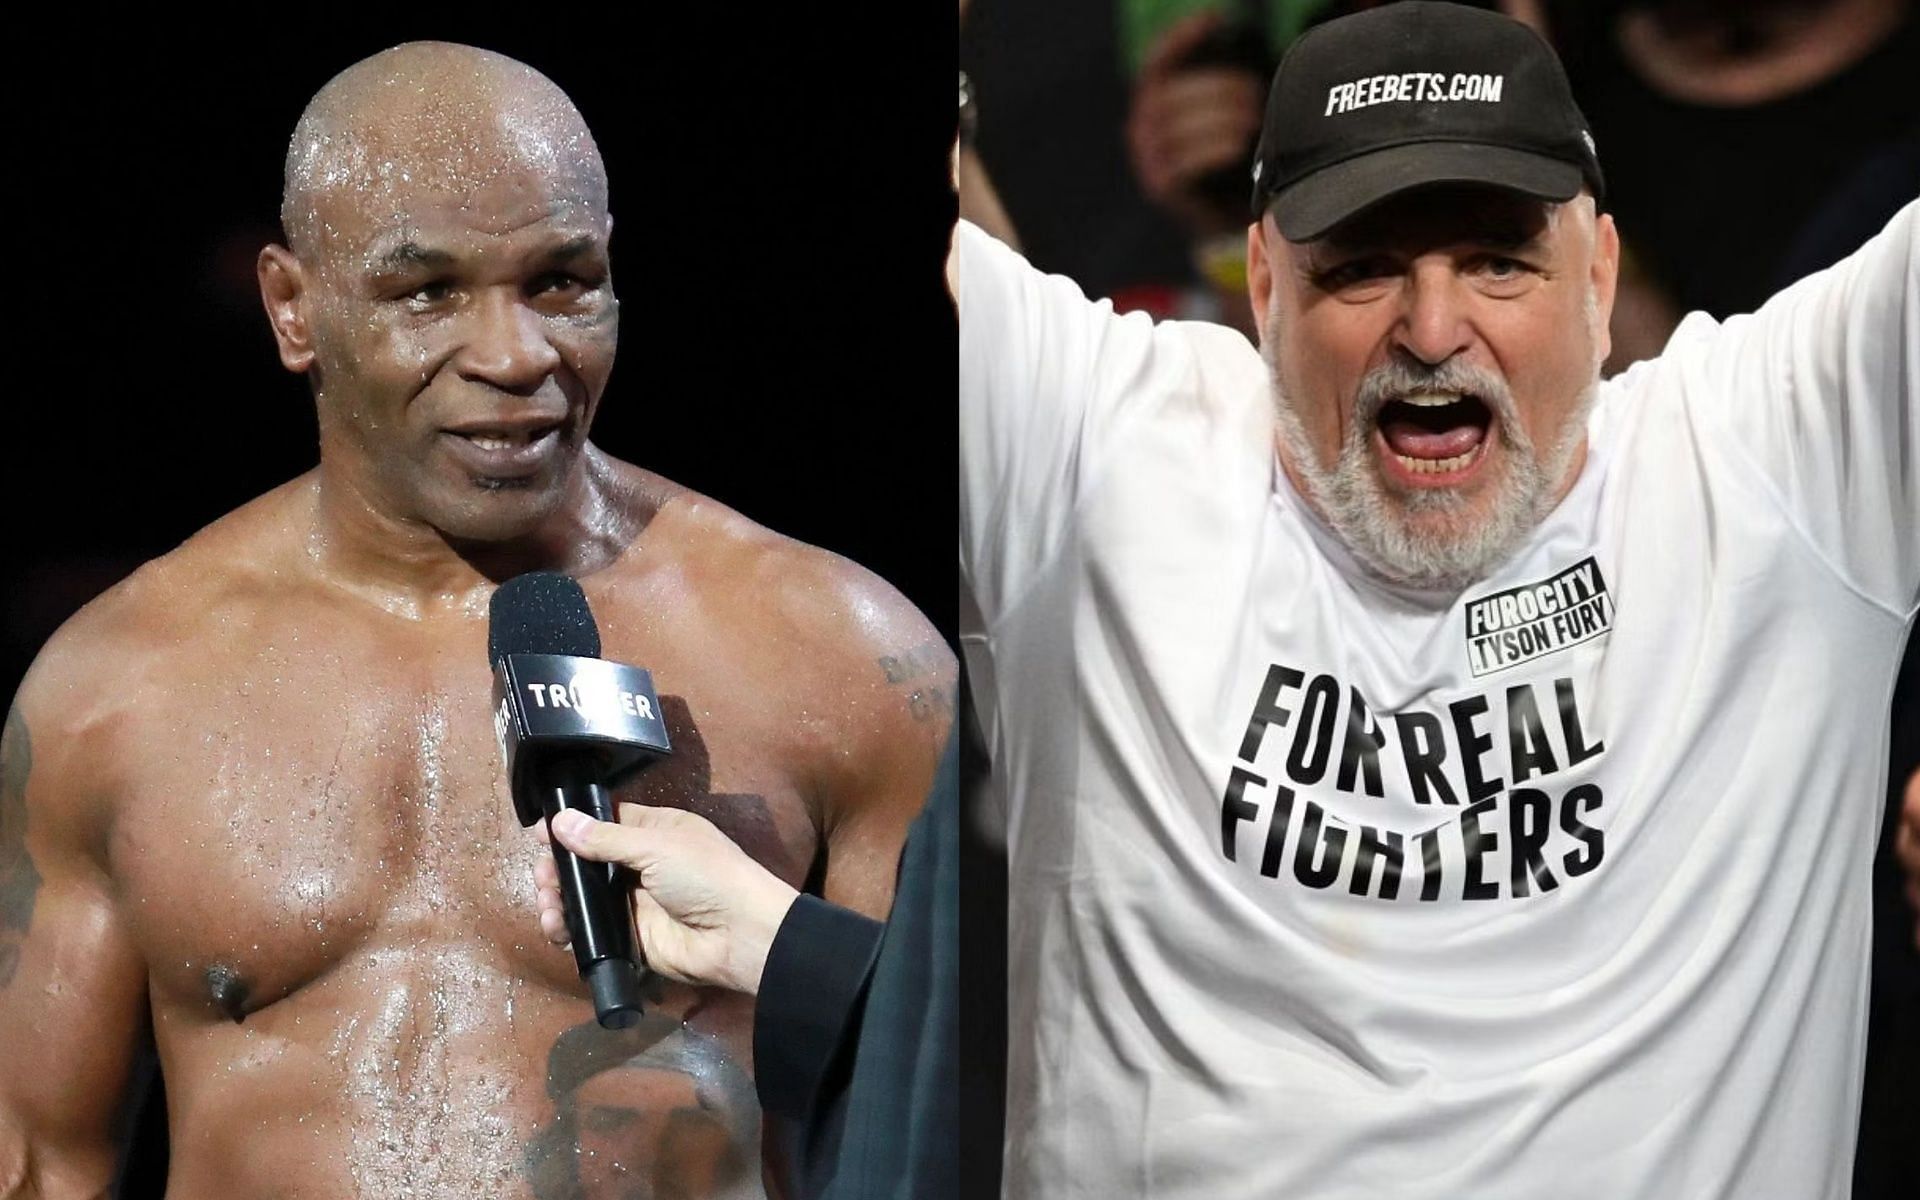 Mike Tyson (L), and John Fury (R).